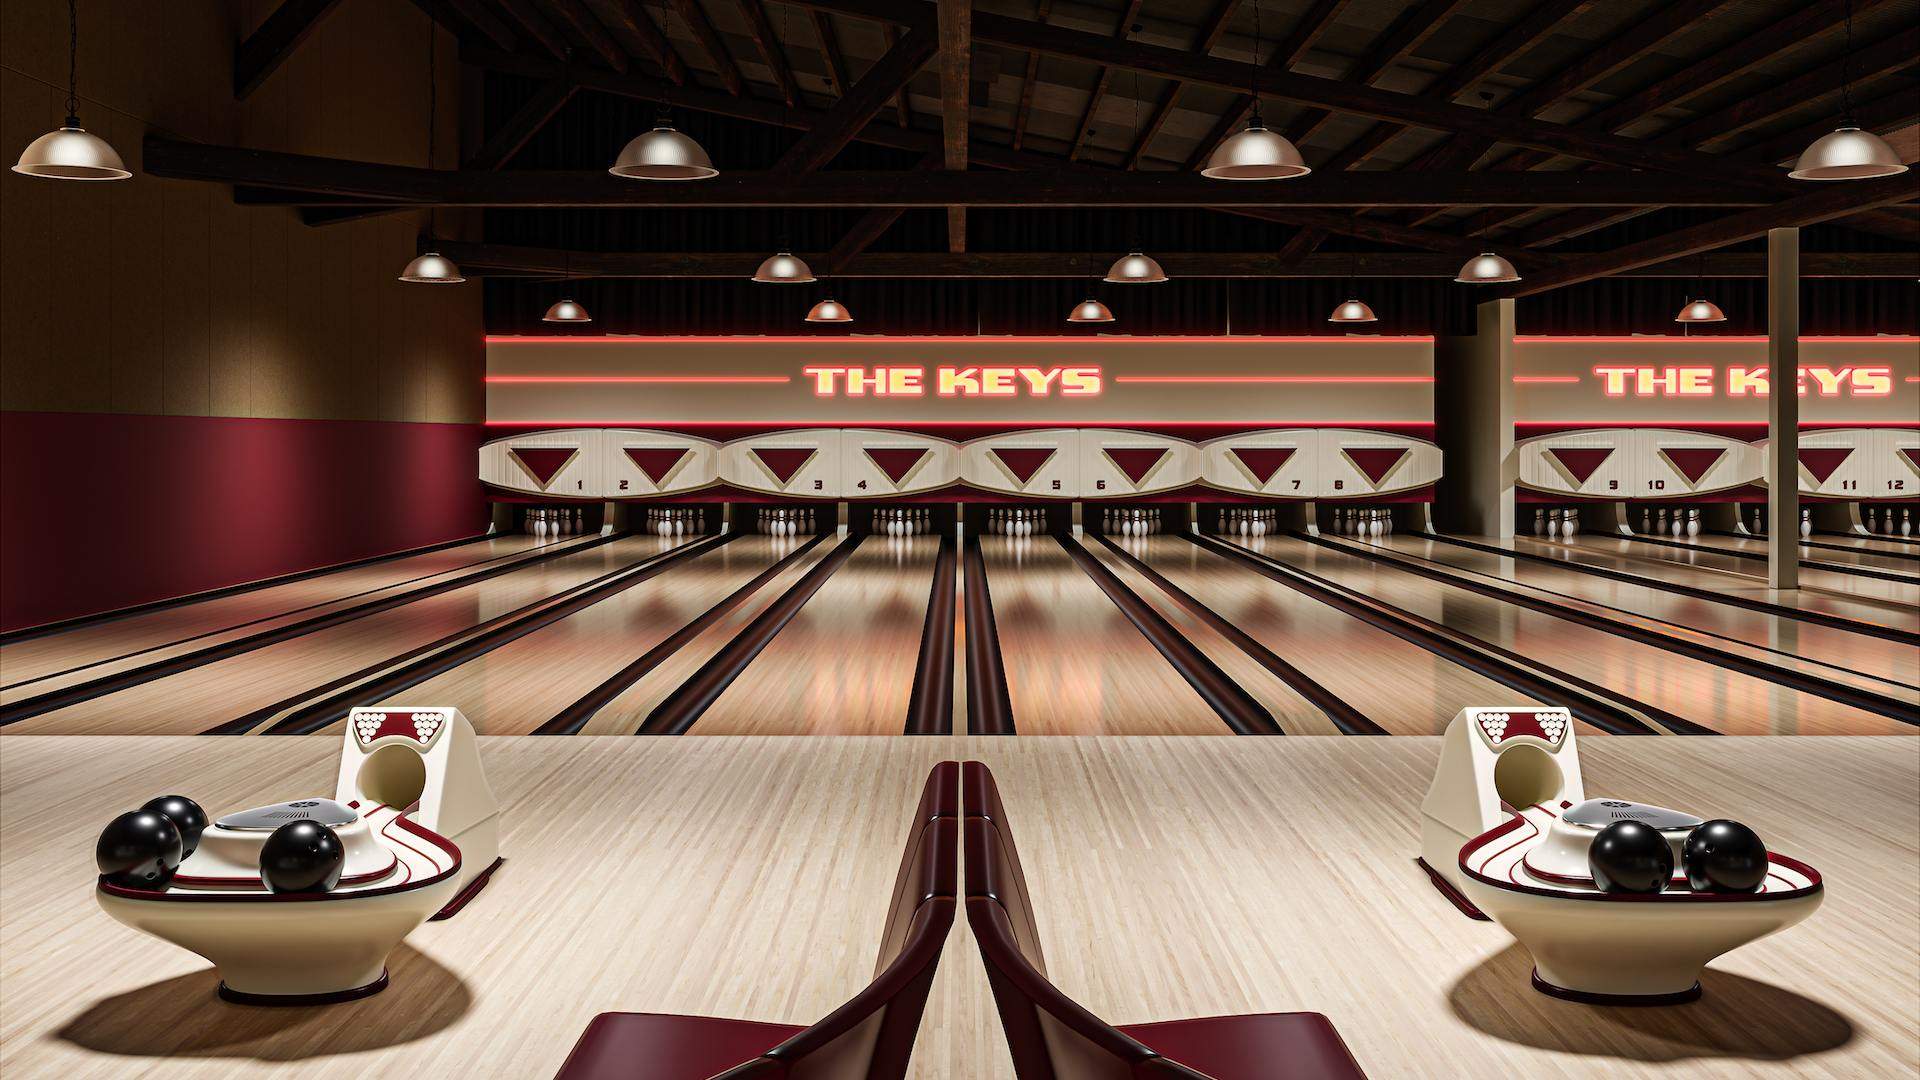 The Keys Is a New All-In-One Beer Garden, Arcade and Bowling Alley Opening This Summer